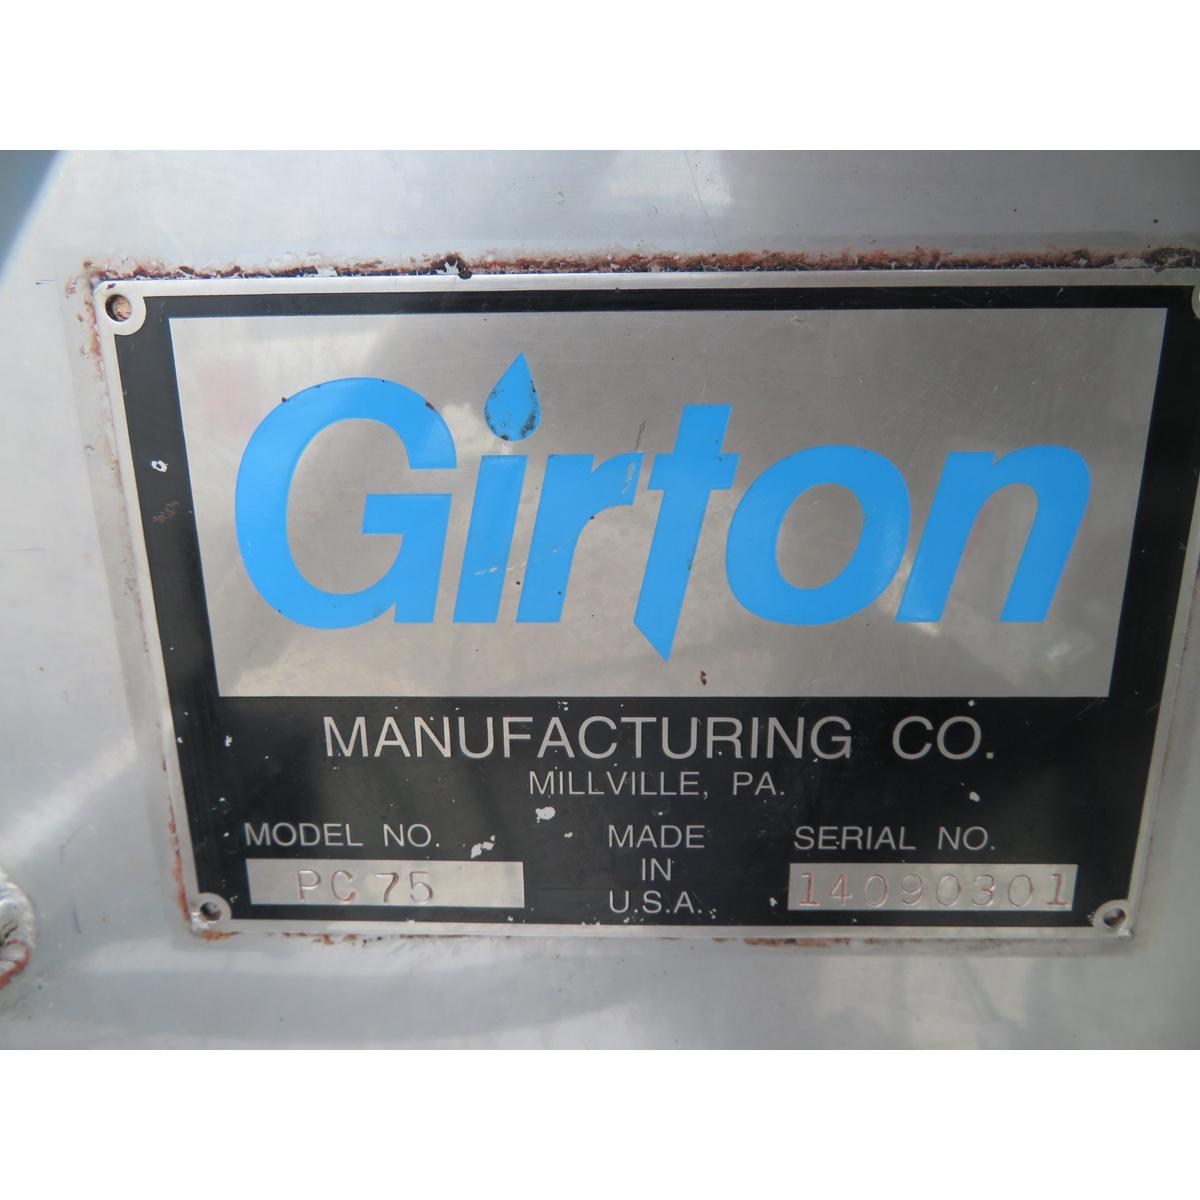 Girton/CapKold CKPC-75 Cook/Chill Tank, Used Excellent Condition image 6